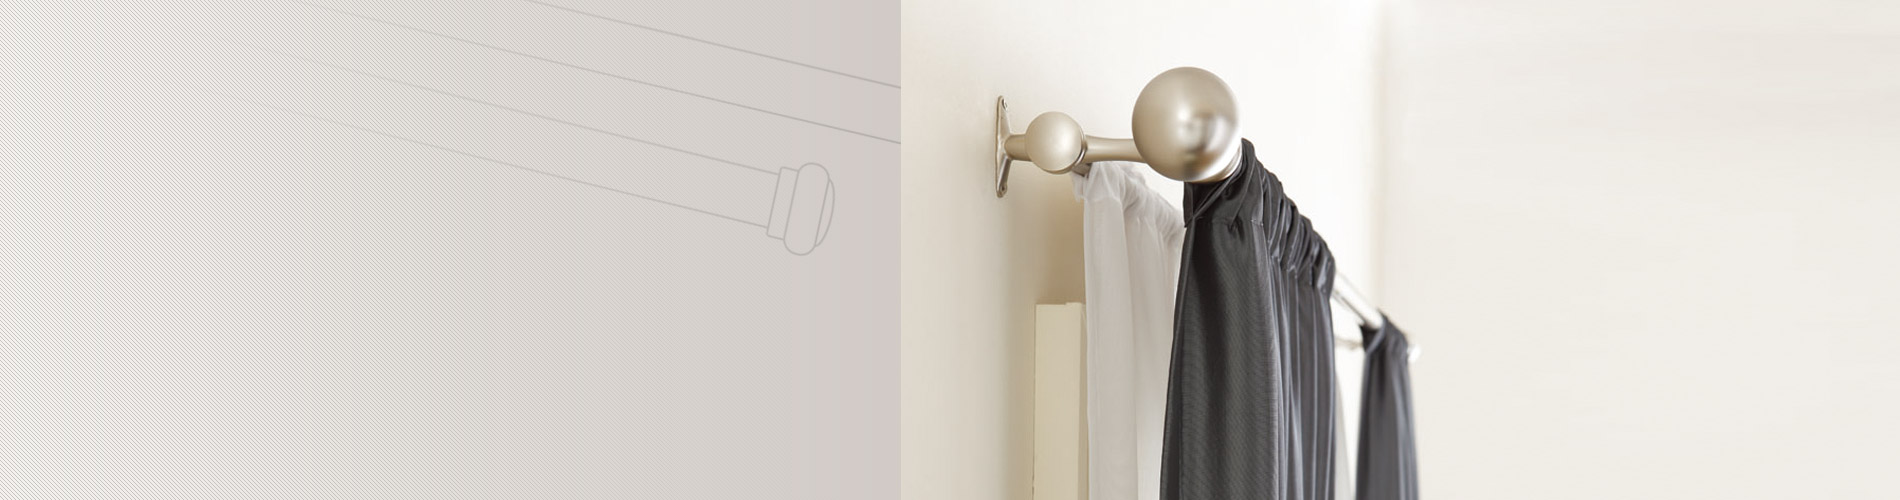 Curtain Rod is always affixed on the wall with decorative finials and brackets. It can operate as telescopic rod, single rod, double rod and swing arm rod.